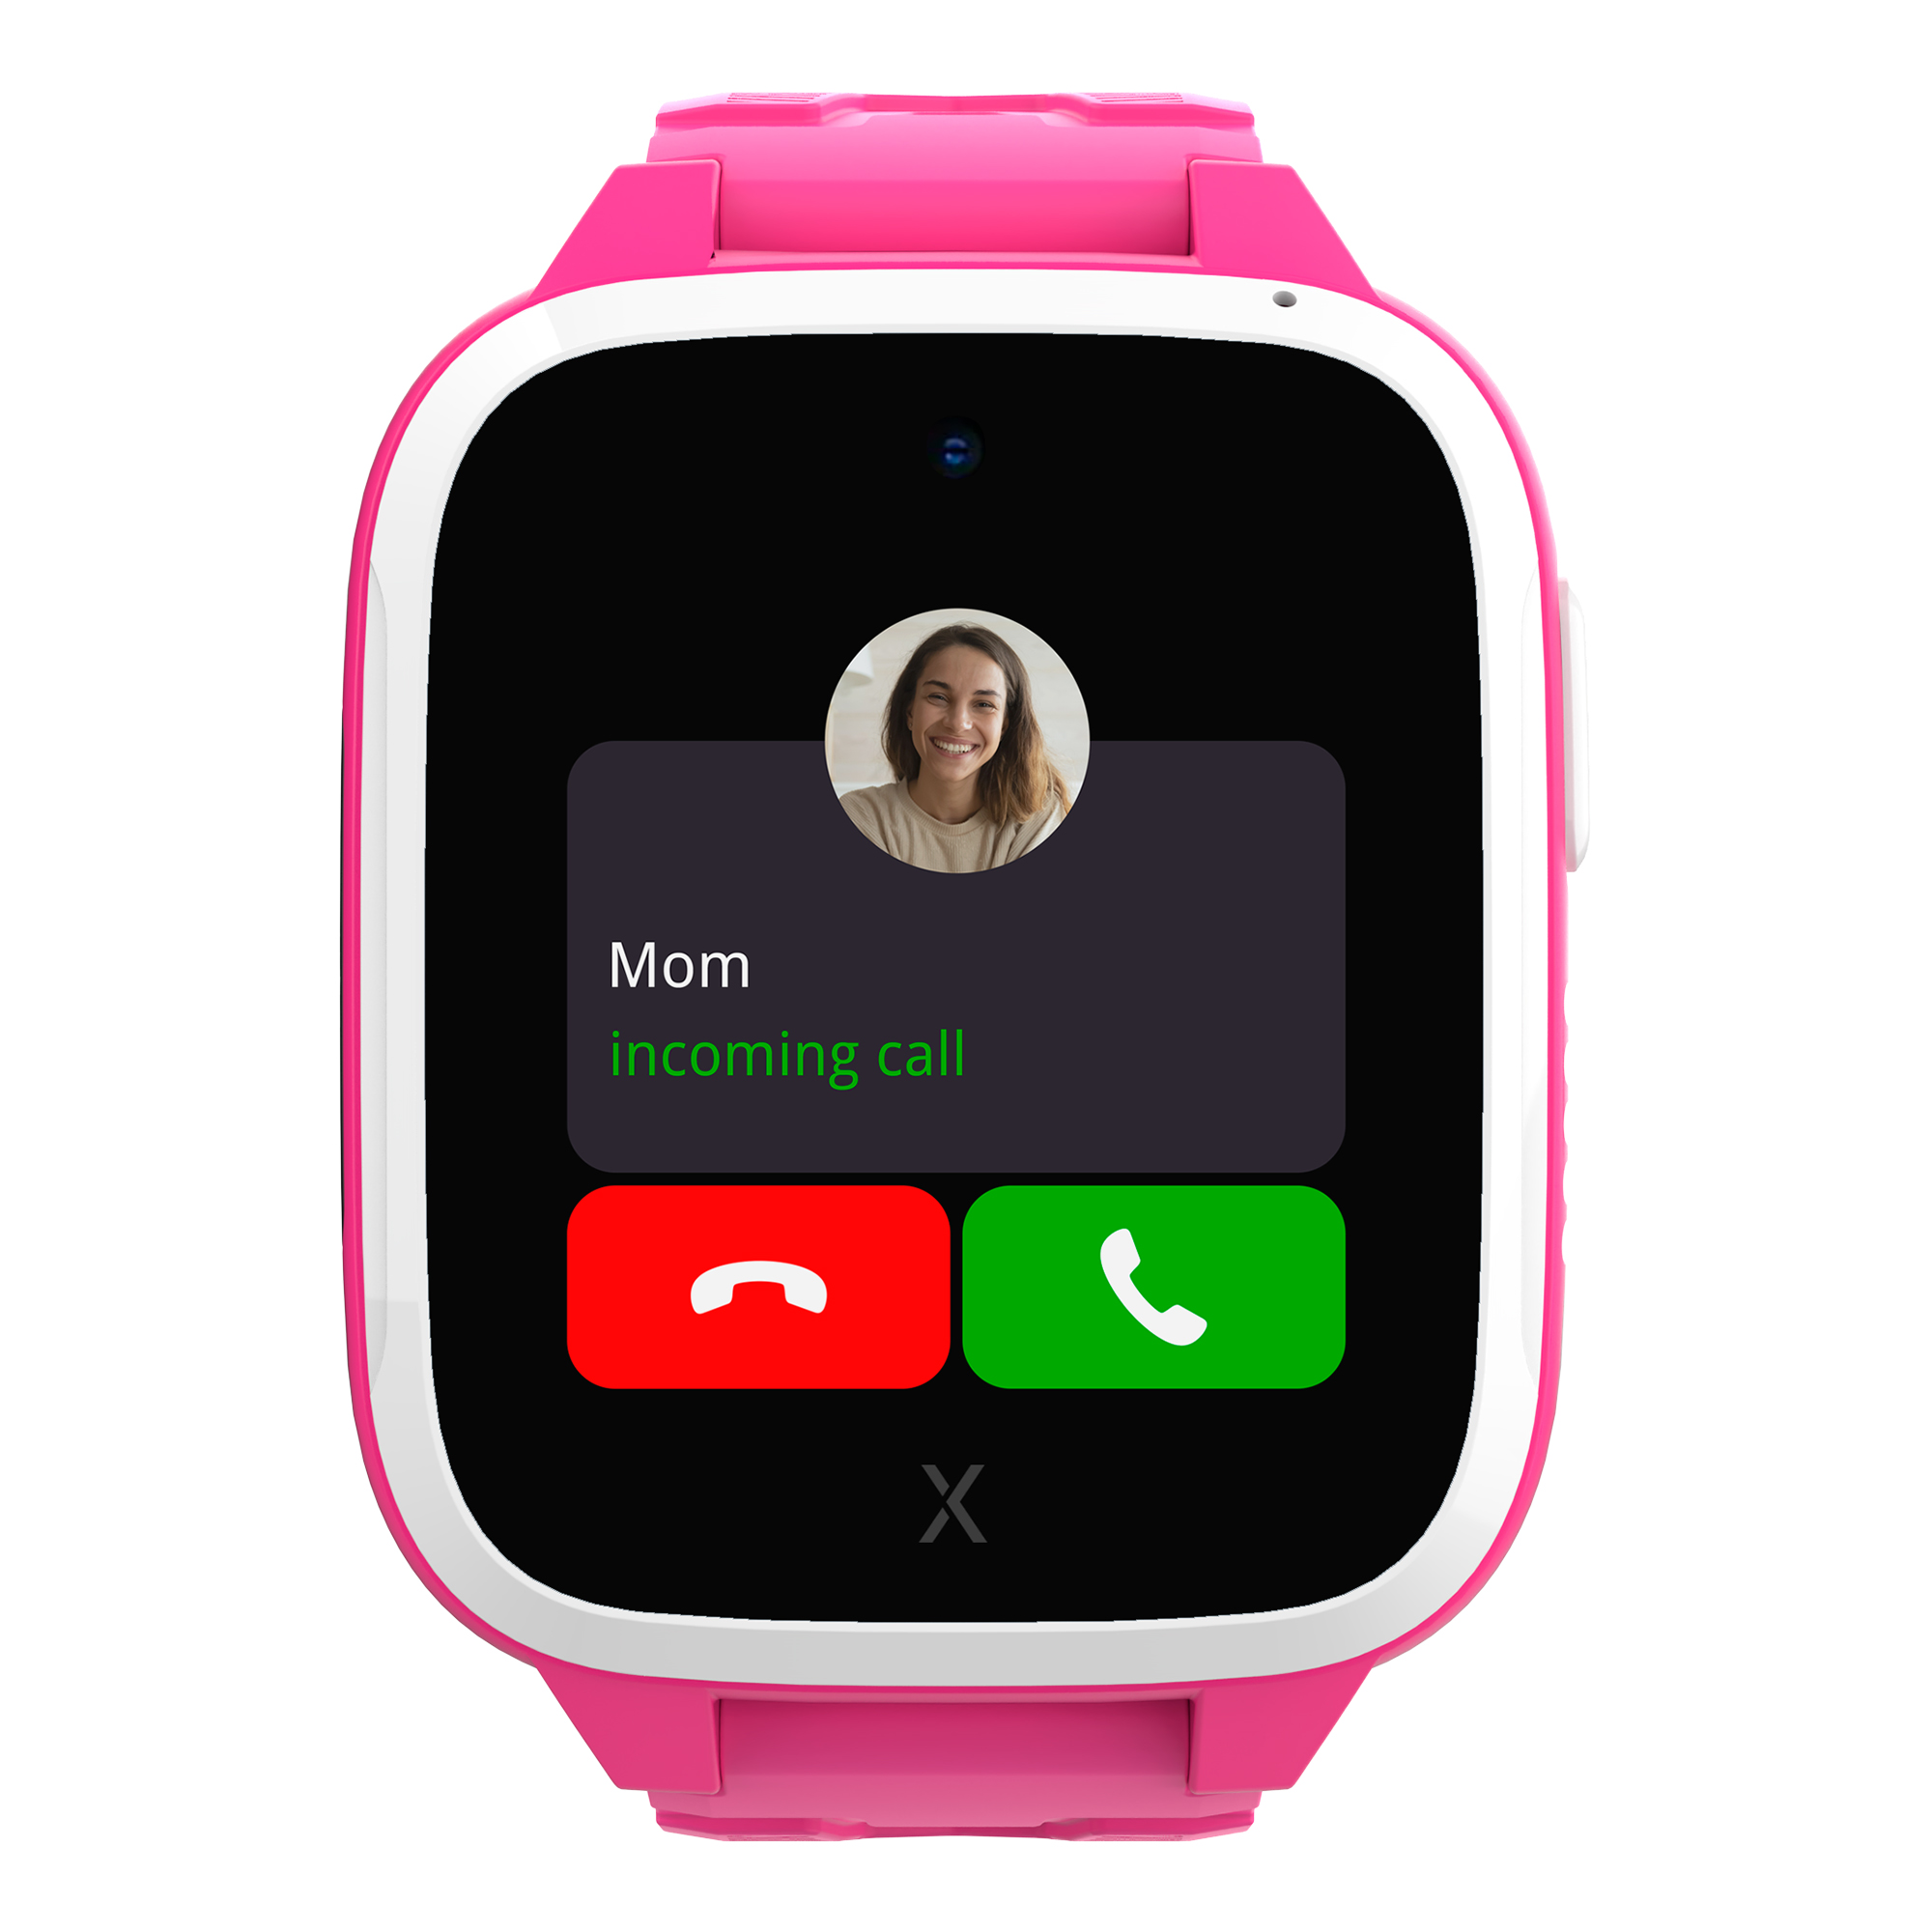 Xplora XGO3 Kids Smartwatch Cell Phone with GPS Tracker - Pink